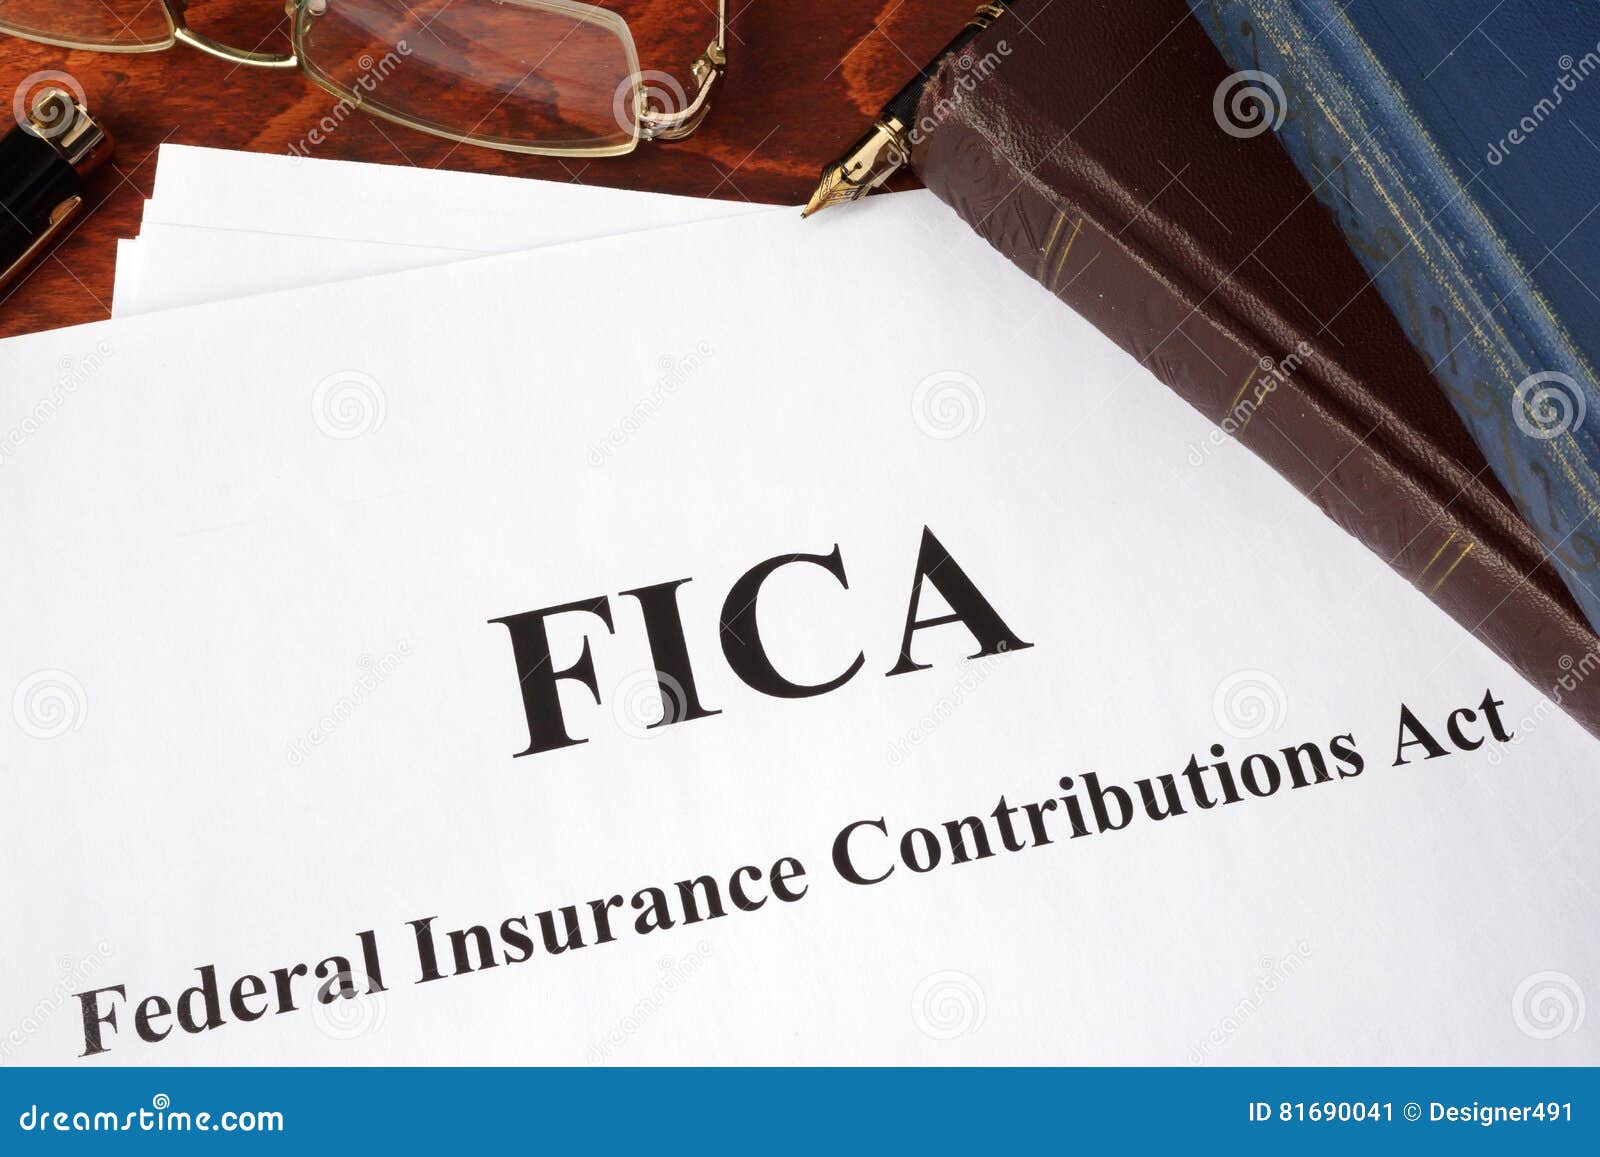 fica federal insurance contributions act